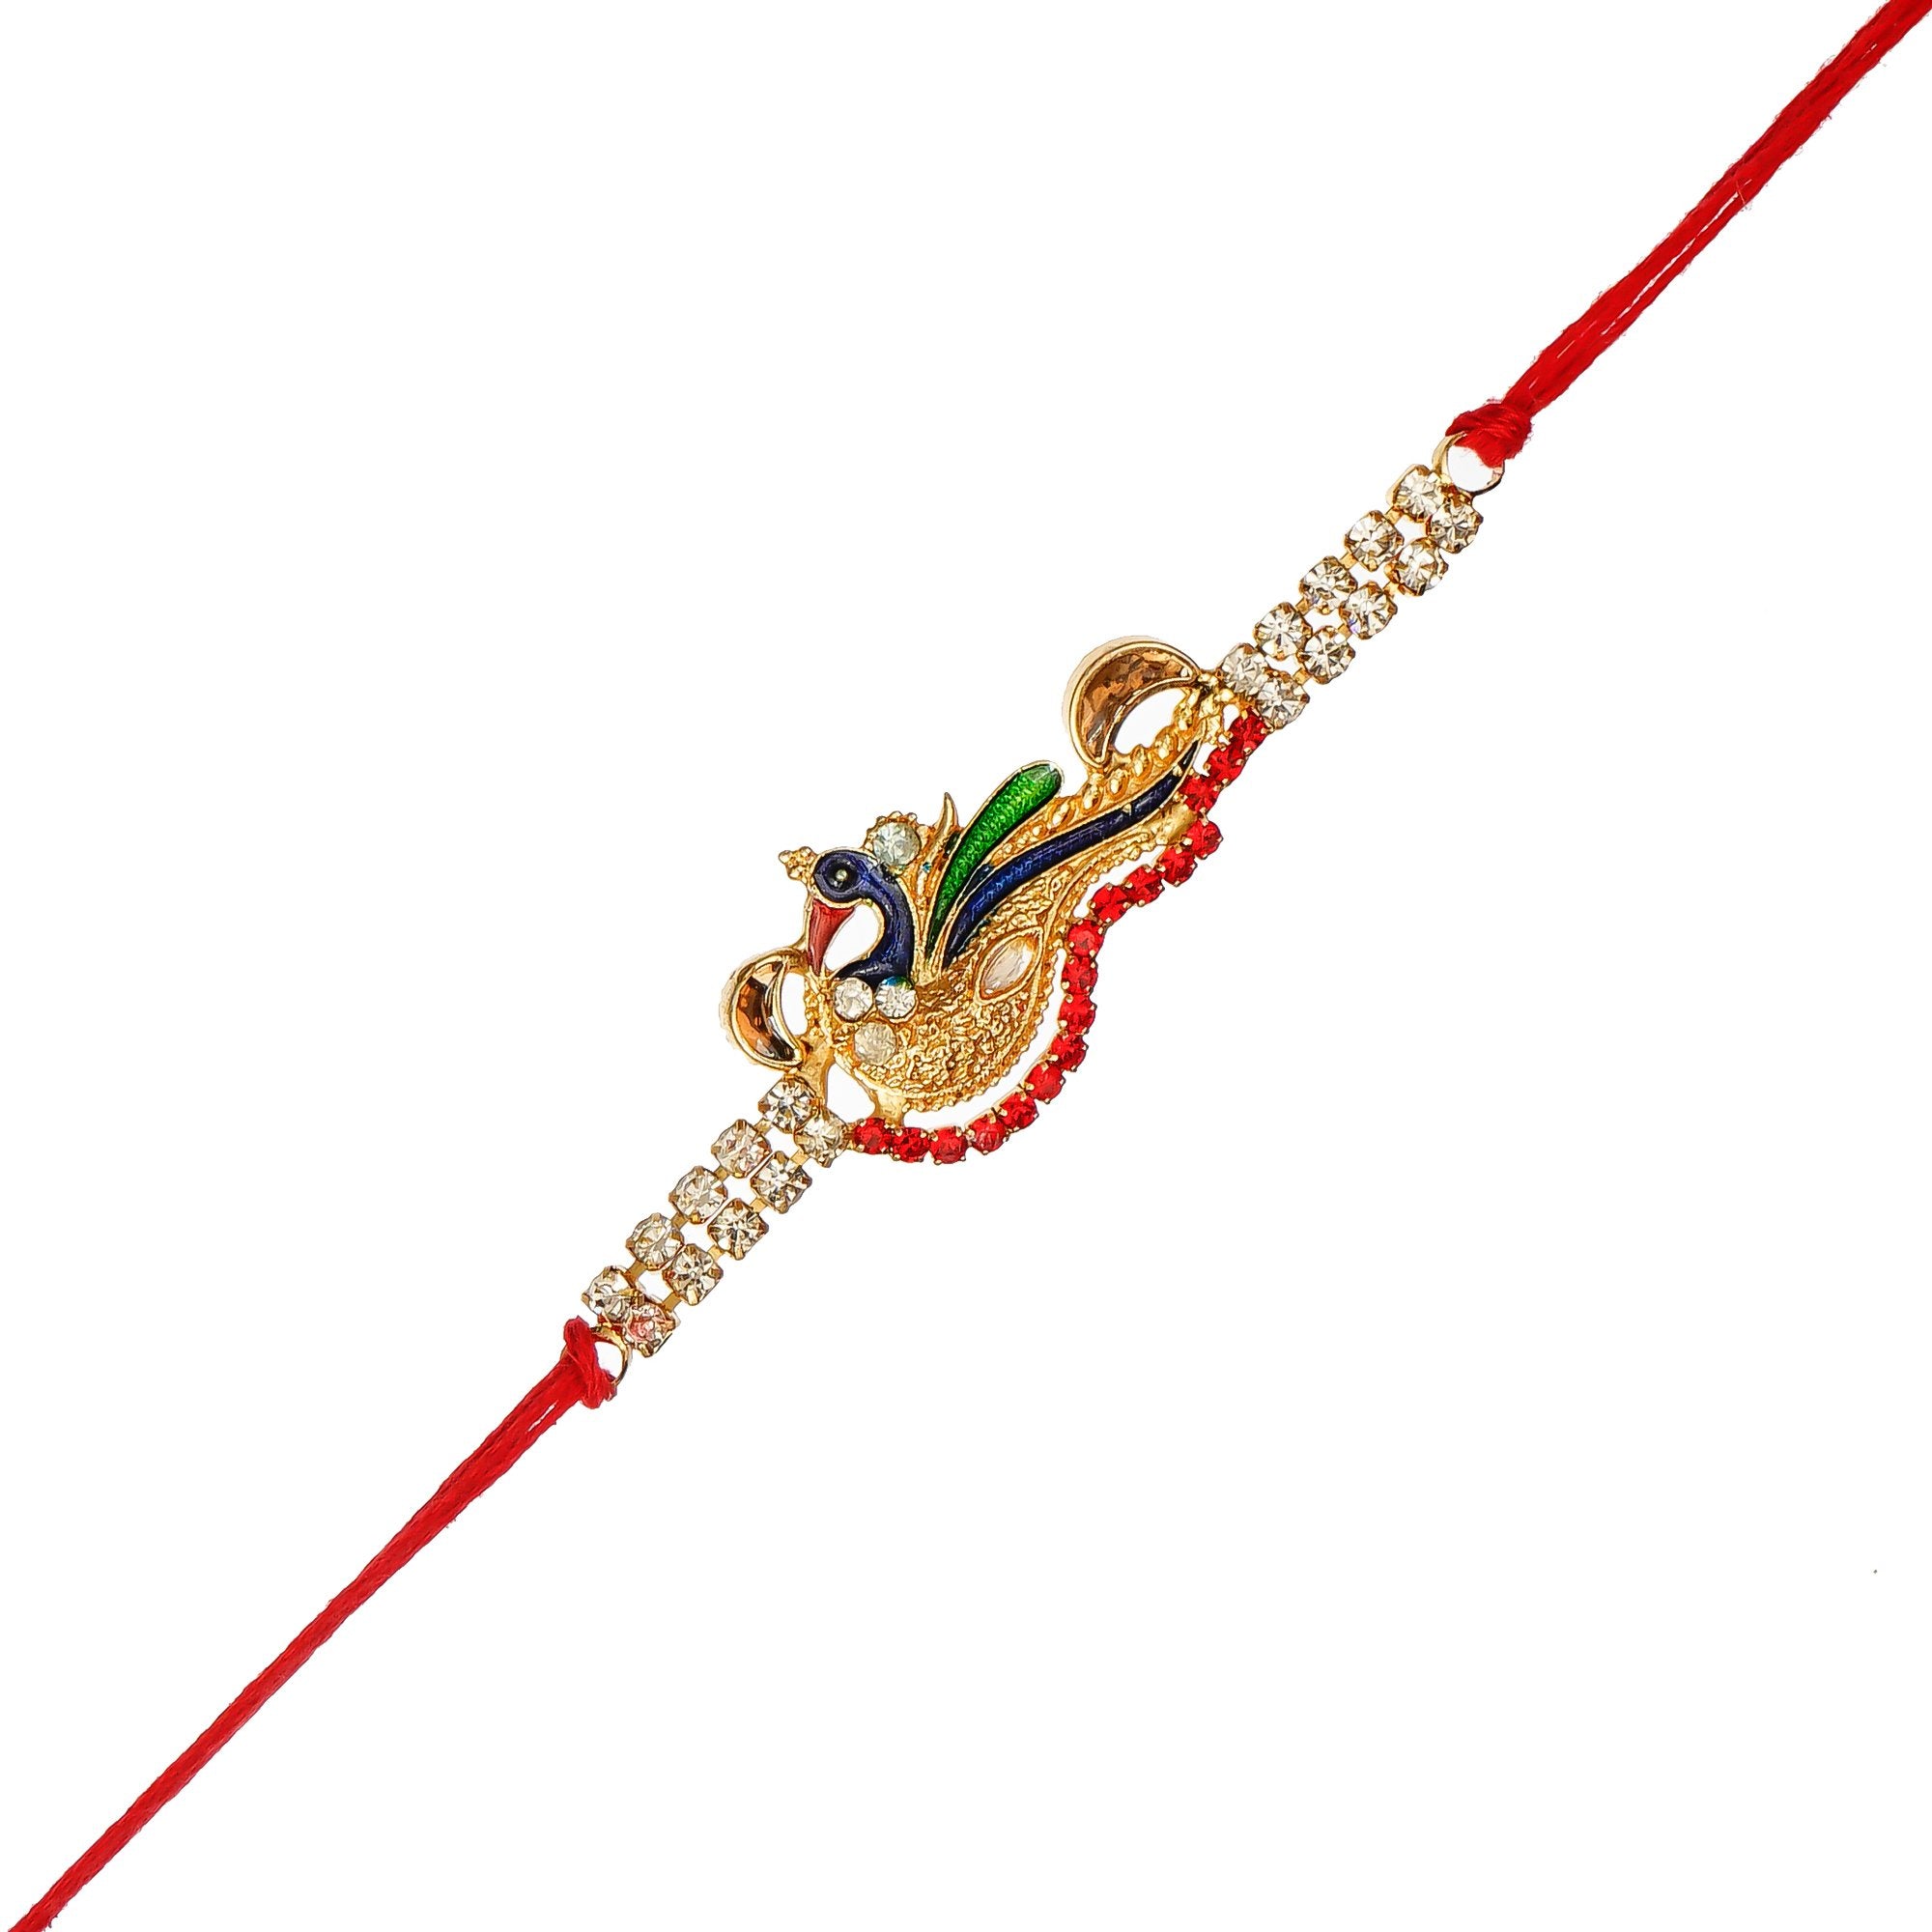 Designer Peacock Rakhi and Roli Chawal Pack, Best Wishes Greeting Card 1